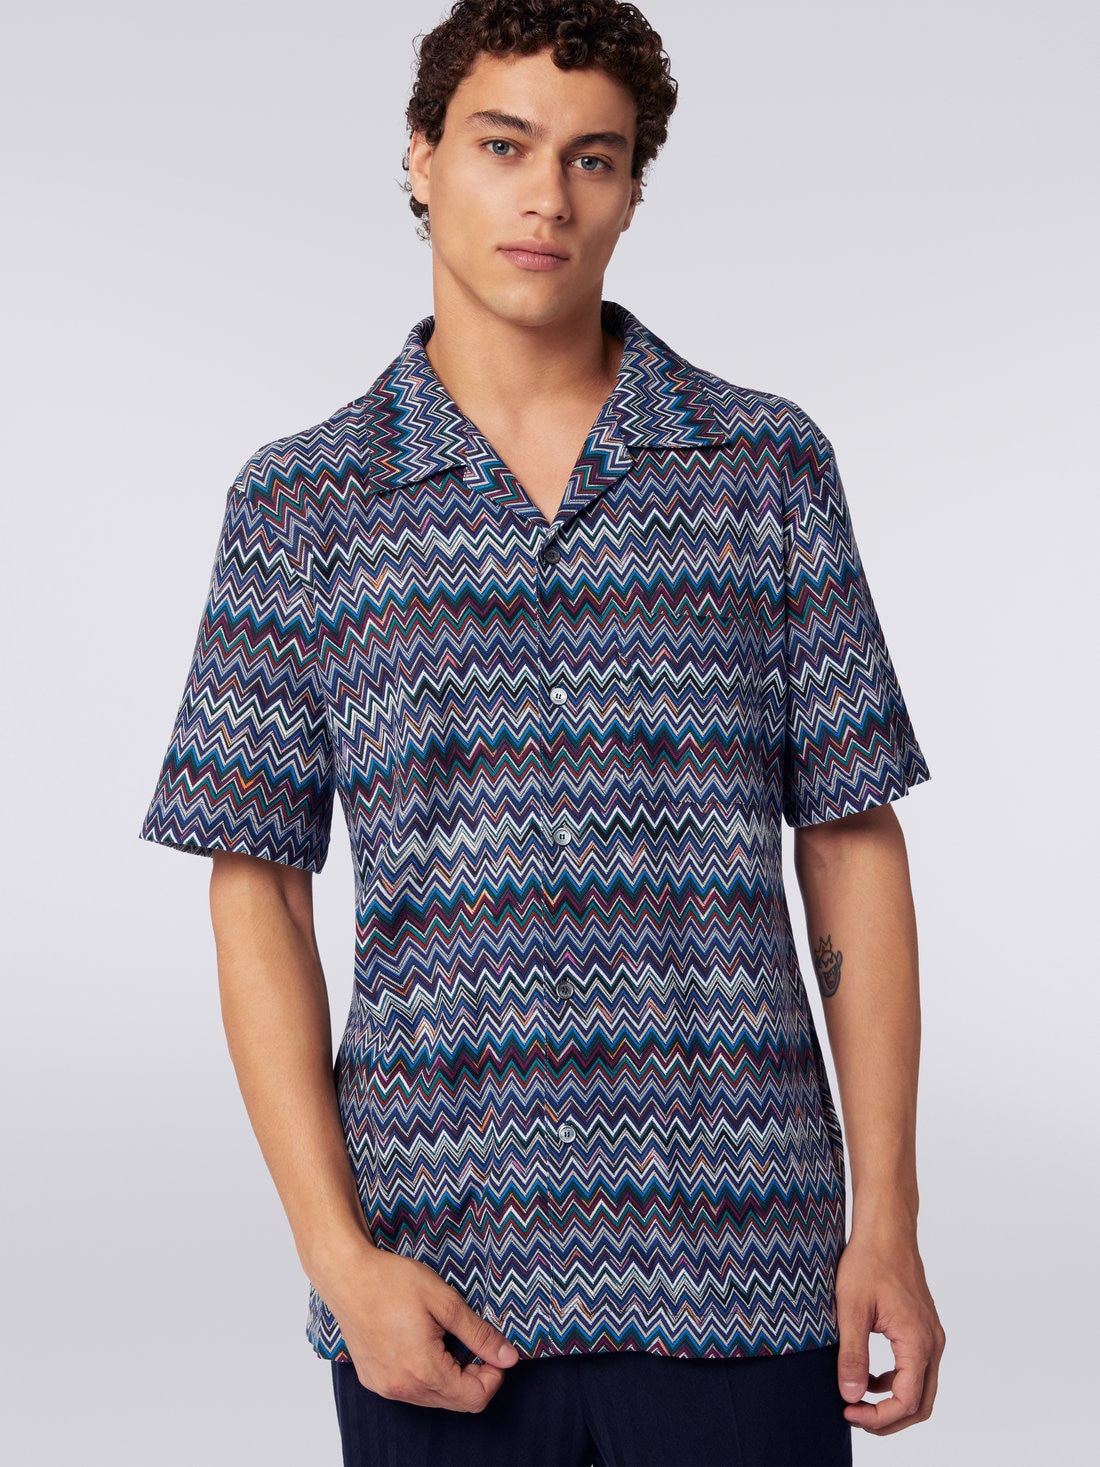 Short-sleeved bowling shirt in zigzag cotton and viscose, Navy Blue  - US23WJ08BR00OUSM8Y1 - 4